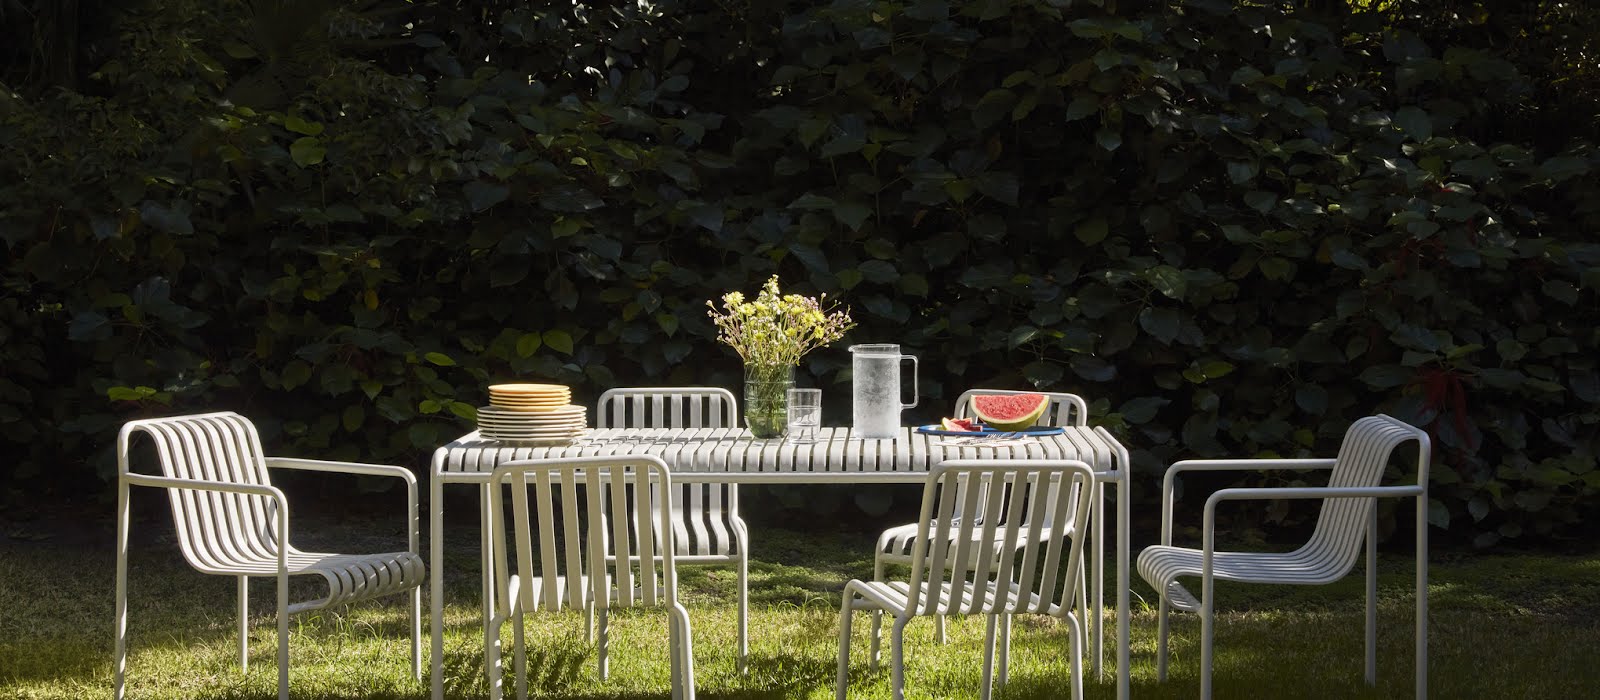 Outdoor table and chairs sets to order now for summer